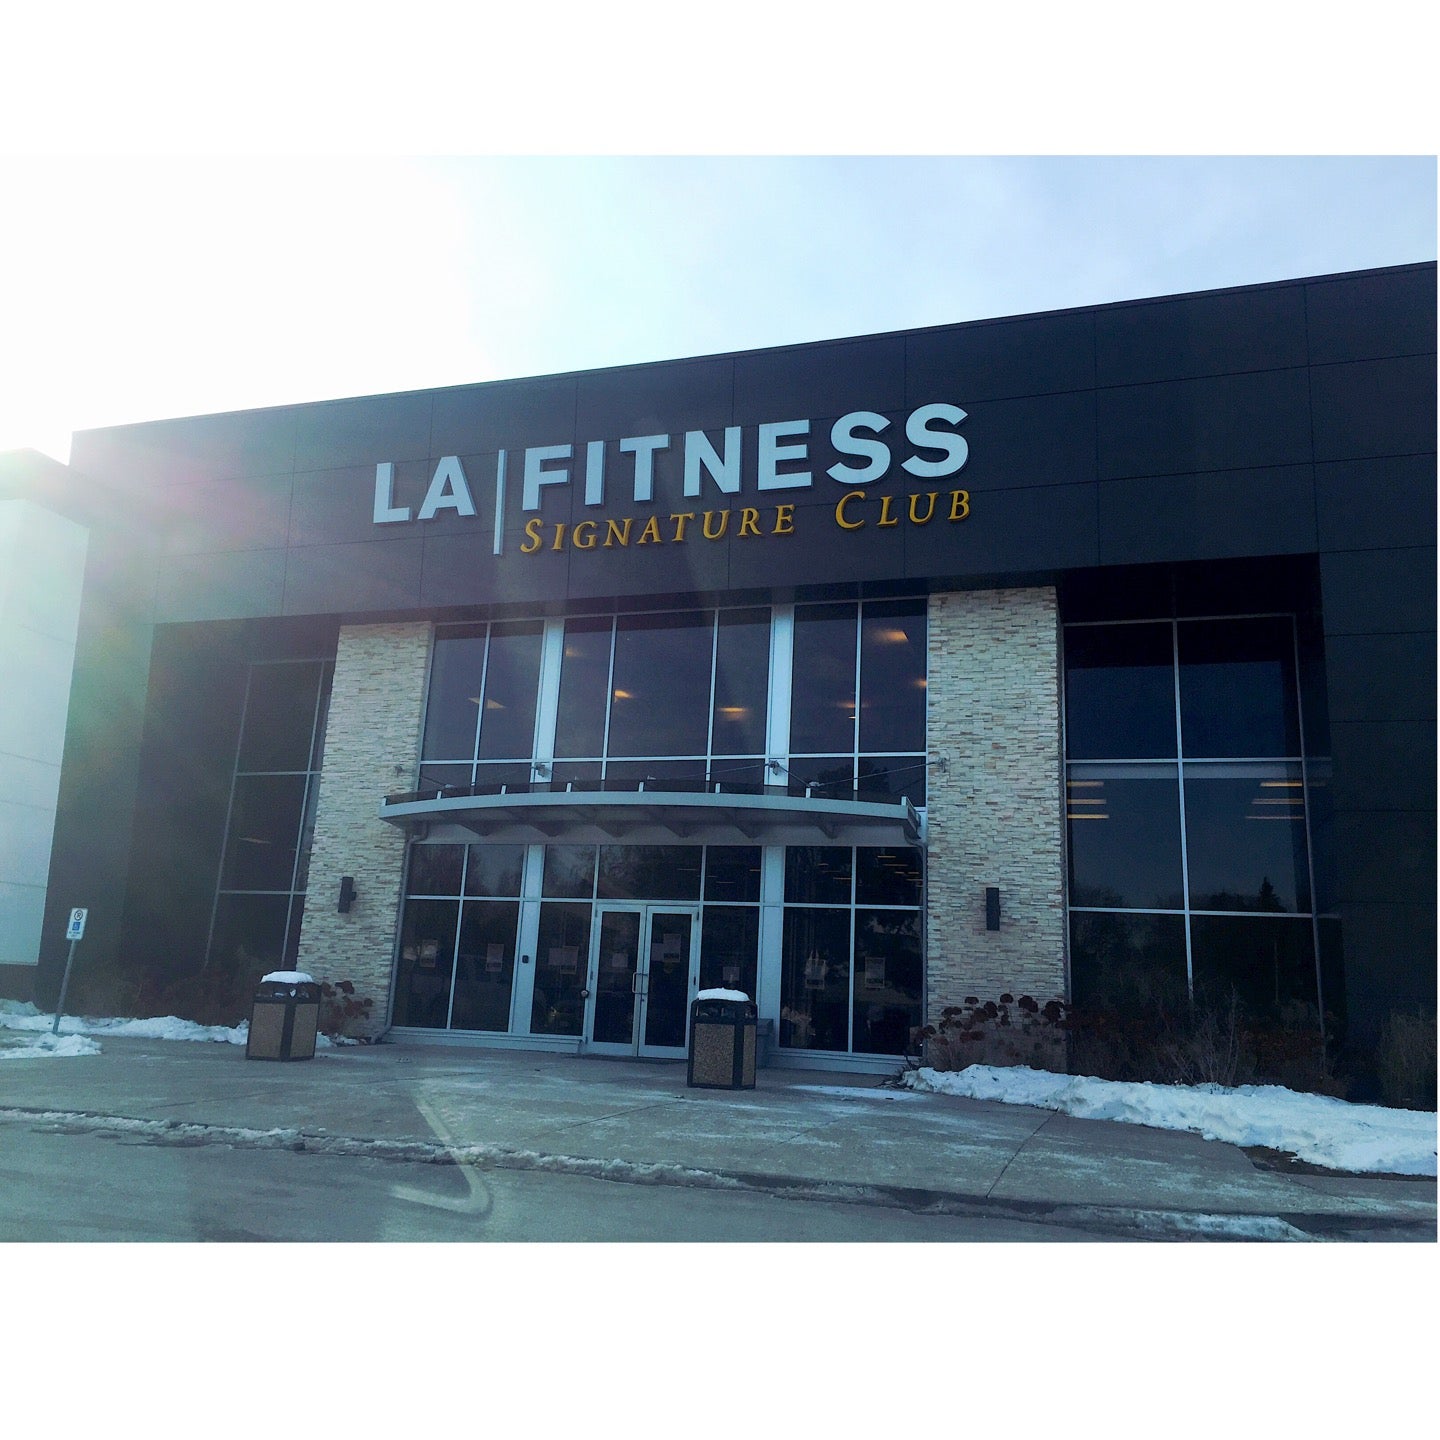 LA Fitness Don Mills (@lafitness.donmills) • Instagram photos and